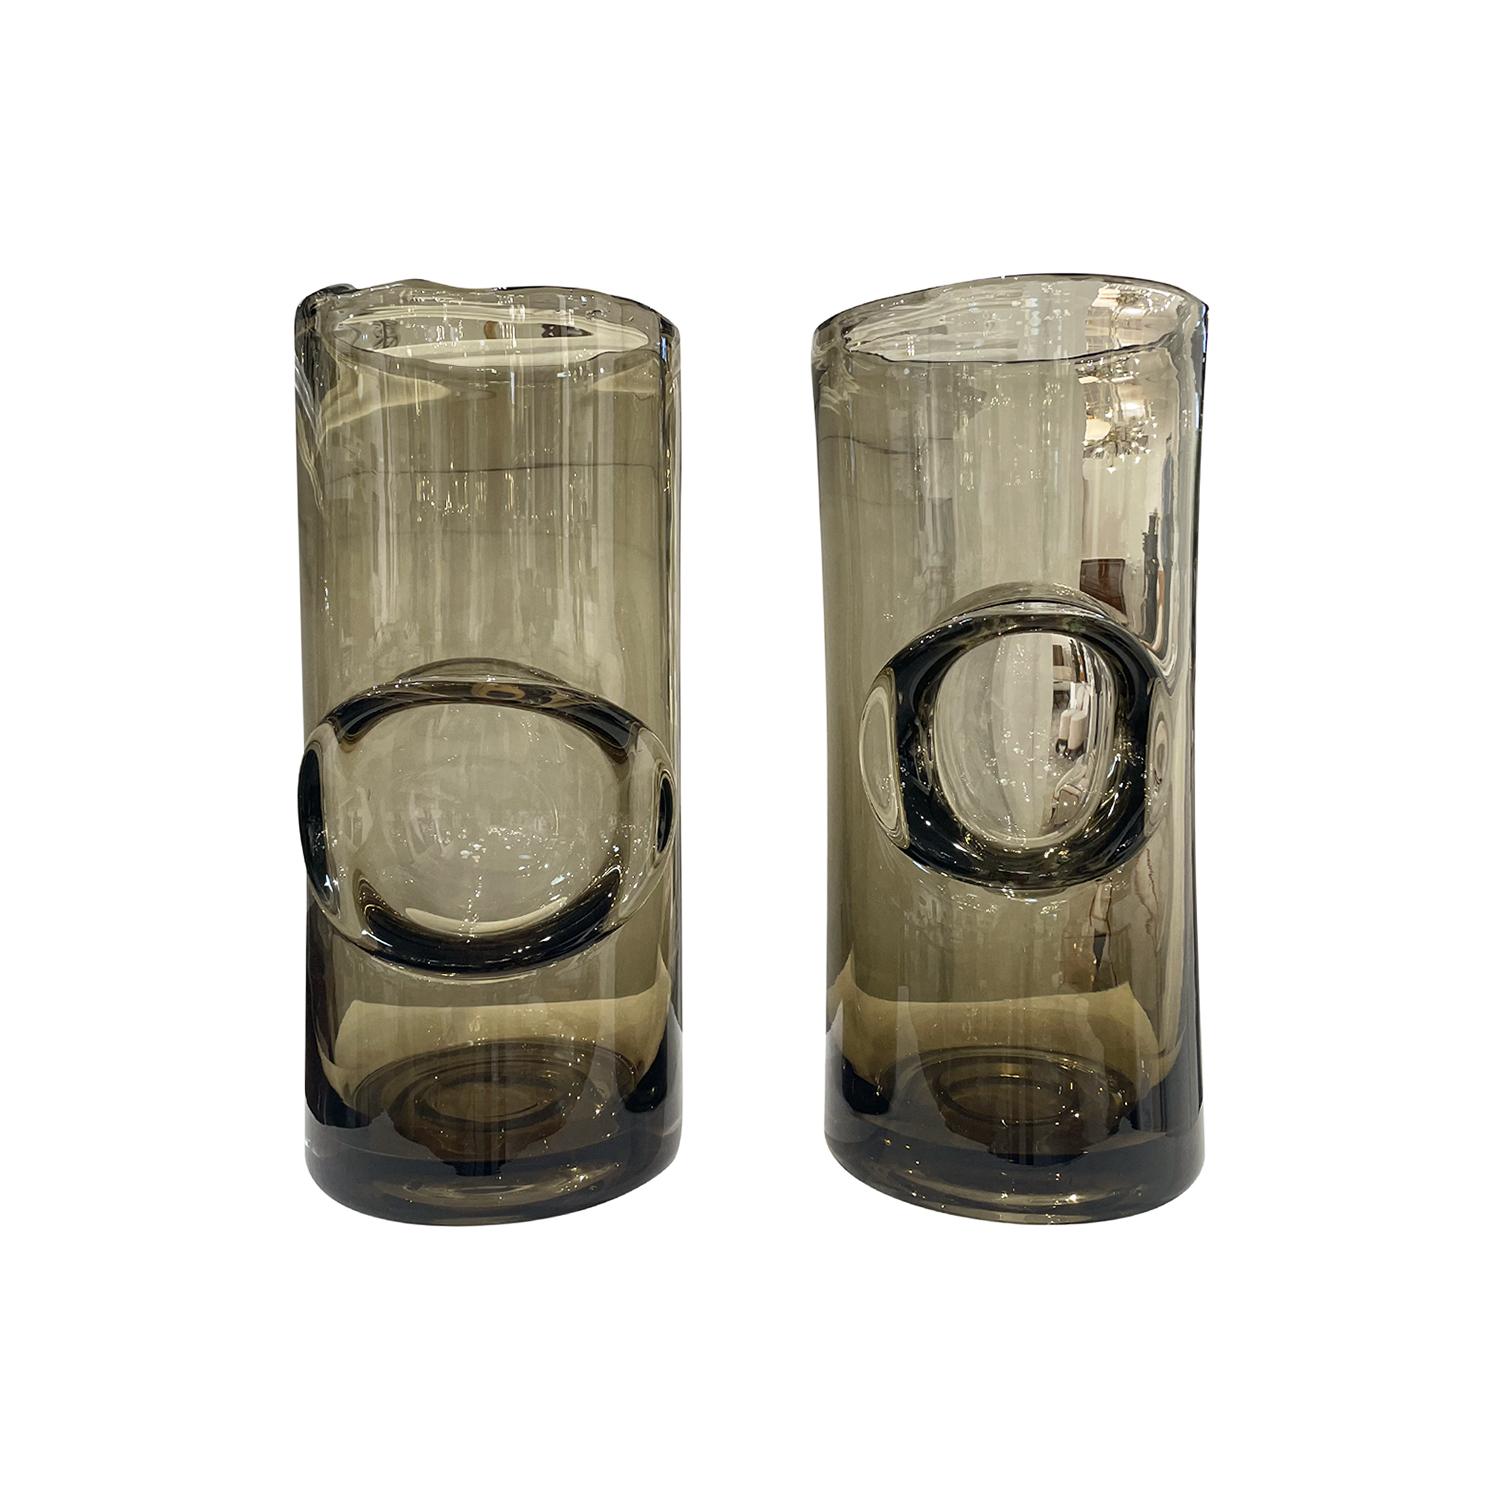 A pair of mouth blown crystal glass vases with a contemporary large irregular bubble décor. The heavy cylinder shaped crystal glass object has an artistic inclusion of an iridescent smoke color. A unique handmade design adds to the extraordinary and